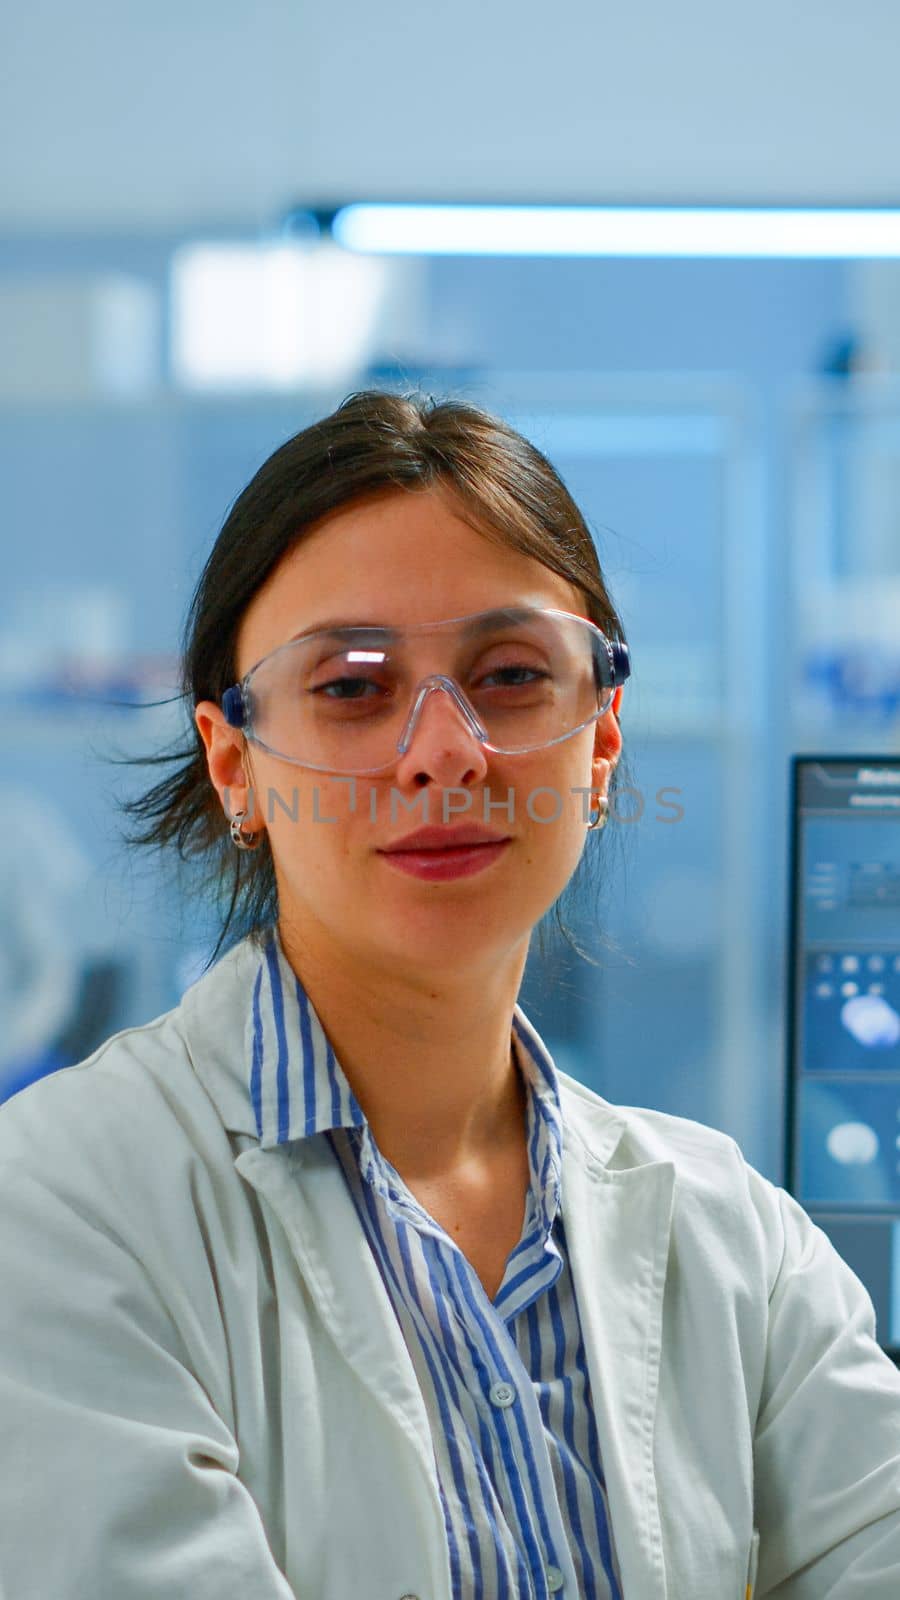 Chemist with lab coat sitting in laboratory looking at camera smiling, while colleague working on computer in background. Scientist examining virus evolution using high tech for scientific research